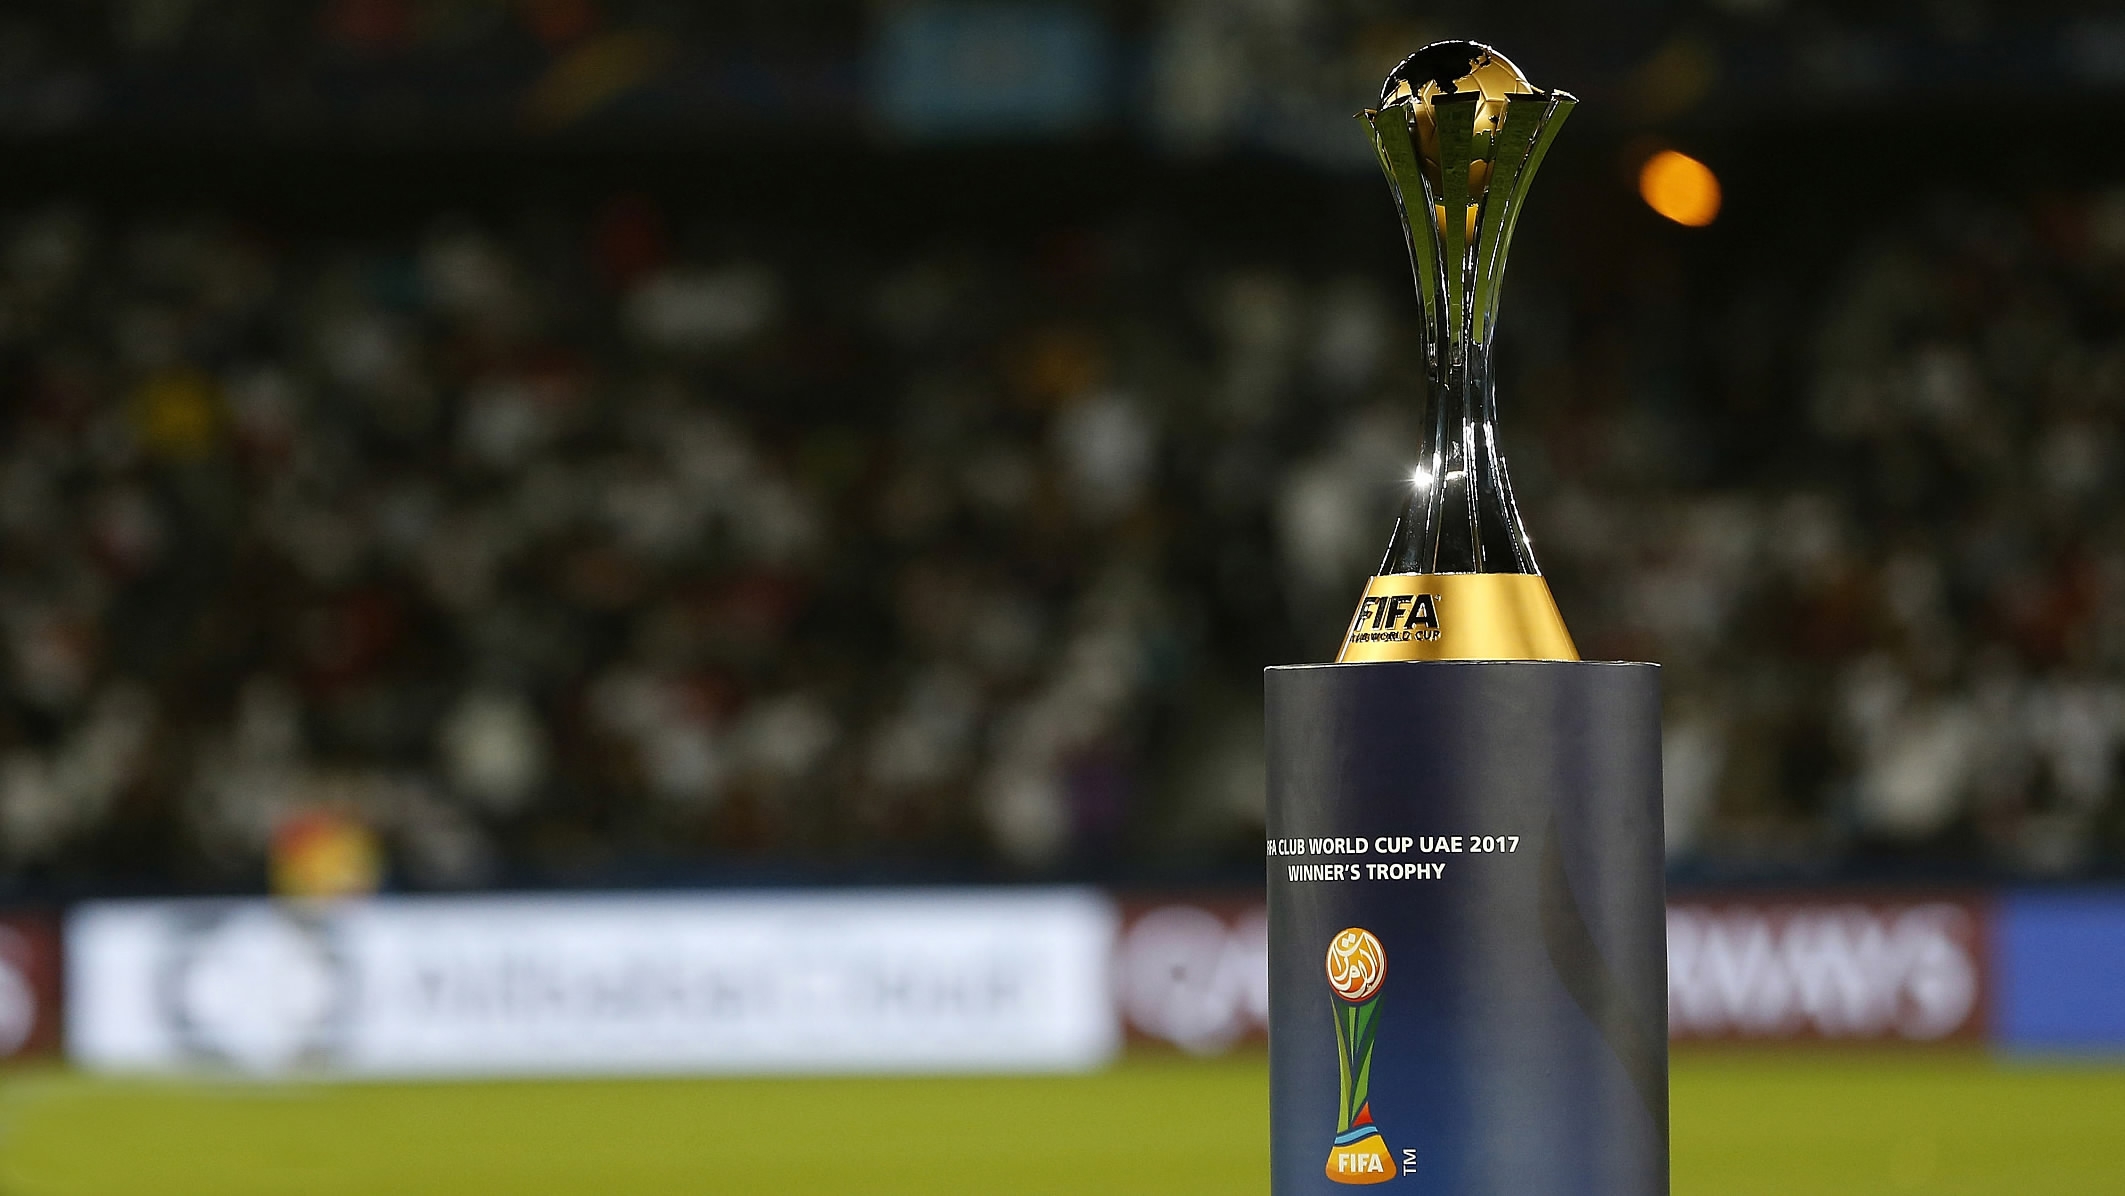 2021 FIFA Club World Cup proposed to begin from June 17 and end on July 4